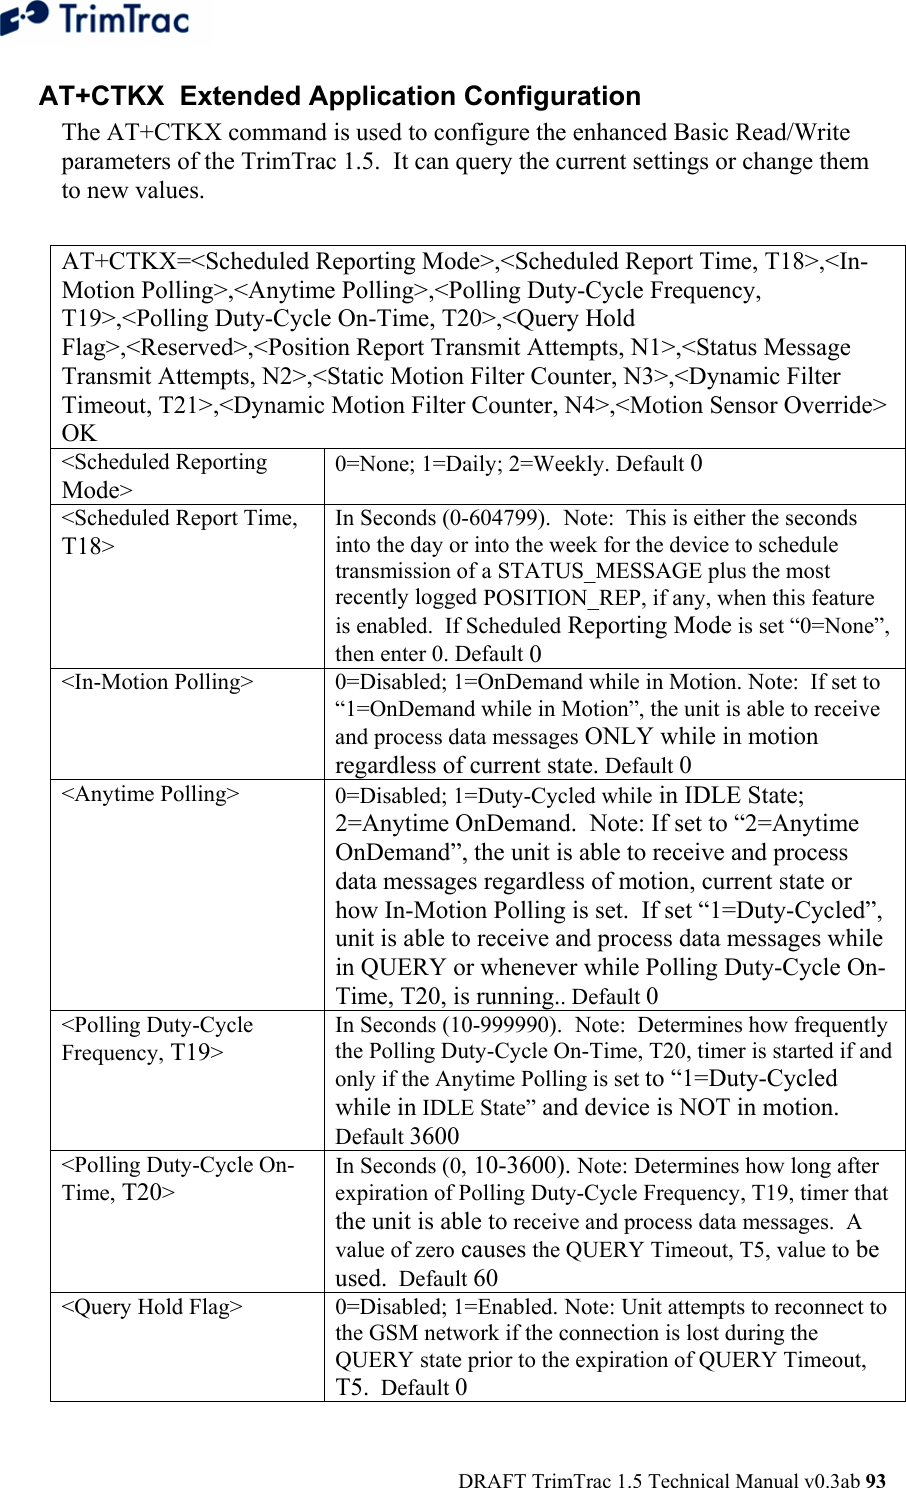  DRAFT TrimTrac 1.5 Technical Manual v0.3ab 93  AT+CTKX  Extended Application Configuration The AT+CTKX command is used to configure the enhanced Basic Read/Write parameters of the TrimTrac 1.5.  It can query the current settings or change them to new values.  AT+CTKX=&lt;Scheduled Reporting Mode&gt;,&lt;Scheduled Report Time, T18&gt;,&lt;In-Motion Polling&gt;,&lt;Anytime Polling&gt;,&lt;Polling Duty-Cycle Frequency, T19&gt;,&lt;Polling Duty-Cycle On-Time, T20&gt;,&lt;Query Hold Flag&gt;,&lt;Reserved&gt;,&lt;Position Report Transmit Attempts, N1&gt;,&lt;Status Message Transmit Attempts, N2&gt;,&lt;Static Motion Filter Counter, N3&gt;,&lt;Dynamic Filter Timeout, T21&gt;,&lt;Dynamic Motion Filter Counter, N4&gt;,&lt;Motion Sensor Override&gt; OK &lt;Scheduled Reporting Mode&gt; 0=None; 1=Daily; 2=Weekly. Default 0 &lt;Scheduled Report Time, T18&gt; In Seconds (0-604799).  Note:  This is either the seconds into the day or into the week for the device to schedule transmission of a STATUS_MESSAGE plus the most recently logged POSITION_REP, if any, when this feature is enabled.  If Scheduled Reporting Mode is set “0=None”, then enter 0. Default 0 &lt;In-Motion Polling&gt;  0=Disabled; 1=OnDemand while in Motion. Note:  If set to “1=OnDemand while in Motion”, the unit is able to receive and process data messages ONLY while in motion regardless of current state. Default 0 &lt;Anytime Polling&gt;  0=Disabled; 1=Duty-Cycled while in IDLE State; 2=Anytime OnDemand.  Note: If set to “2=Anytime OnDemand”, the unit is able to receive and process data messages regardless of motion, current state or how In-Motion Polling is set.  If set “1=Duty-Cycled”, unit is able to receive and process data messages while in QUERY or whenever while Polling Duty-Cycle On-Time, T20, is running.. Default 0 &lt;Polling Duty-Cycle Frequency, T19&gt; In Seconds (10-999990).  Note:  Determines how frequently the Polling Duty-Cycle On-Time, T20, timer is started if and only if the Anytime Polling is set to “1=Duty-Cycled while in IDLE State” and device is NOT in motion.  Default 3600 &lt;Polling Duty-Cycle On-Time, T20&gt; In Seconds (0, 10-3600). Note: Determines how long after expiration of Polling Duty-Cycle Frequency, T19, timer that the unit is able to receive and process data messages.  A value of zero causes the QUERY Timeout, T5, value to be used.  Default 60 &lt;Query Hold Flag&gt;  0=Disabled; 1=Enabled. Note: Unit attempts to reconnect to the GSM network if the connection is lost during the QUERY state prior to the expiration of QUERY Timeout, T5.  Default 0 